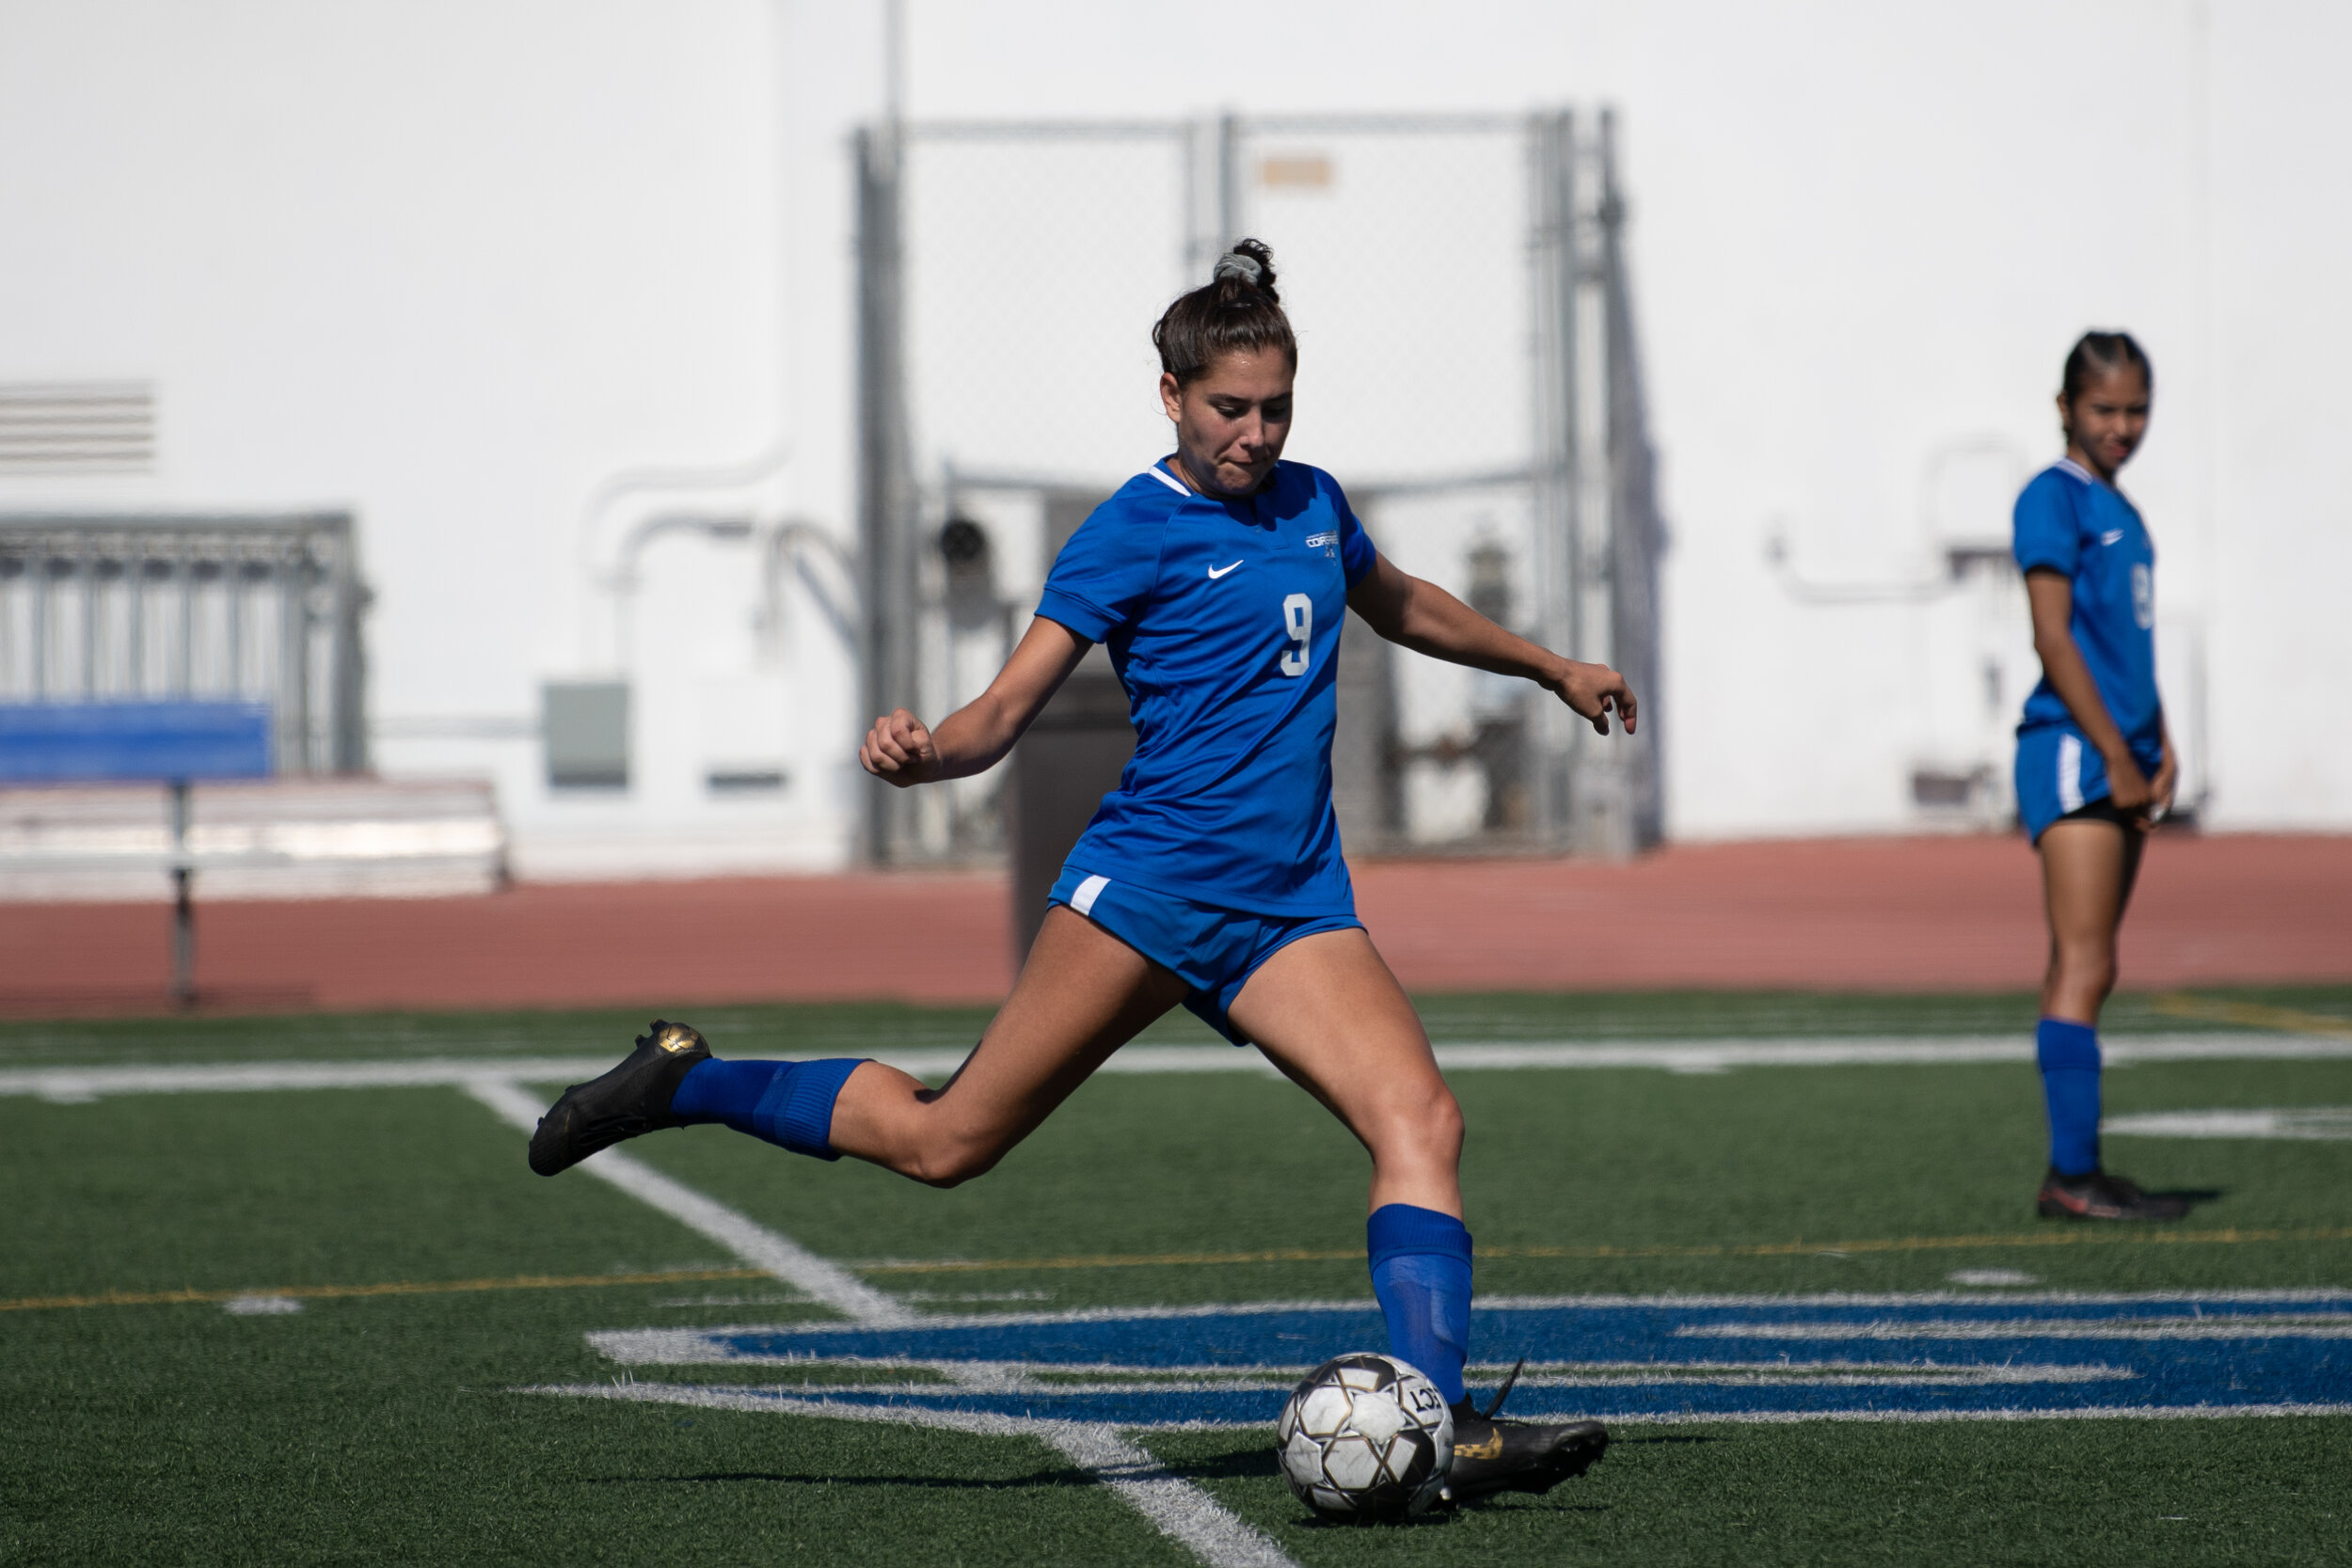  Alexia Mallahi of the Santa Monica College Corsairs winds up for a kick on the Santa Monica College Corsair Field in Santa Monica, Calif. on September 10, 2021. The match against Chaffey is their third game of the year, and their second proper game 